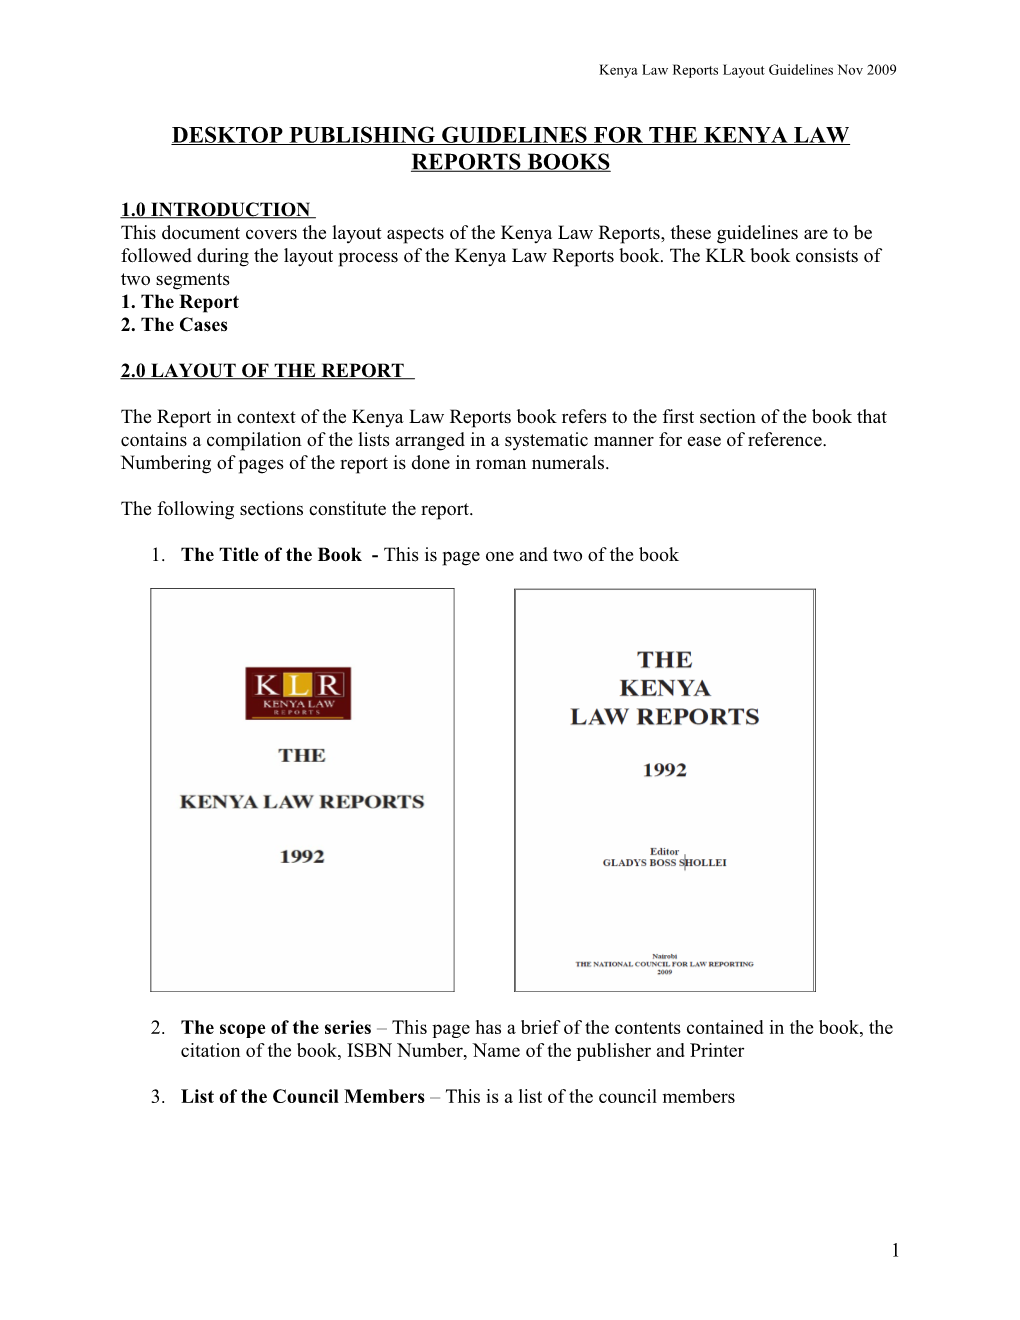 Desktop Publishing Guidelines for the Kenya Law Reports Books